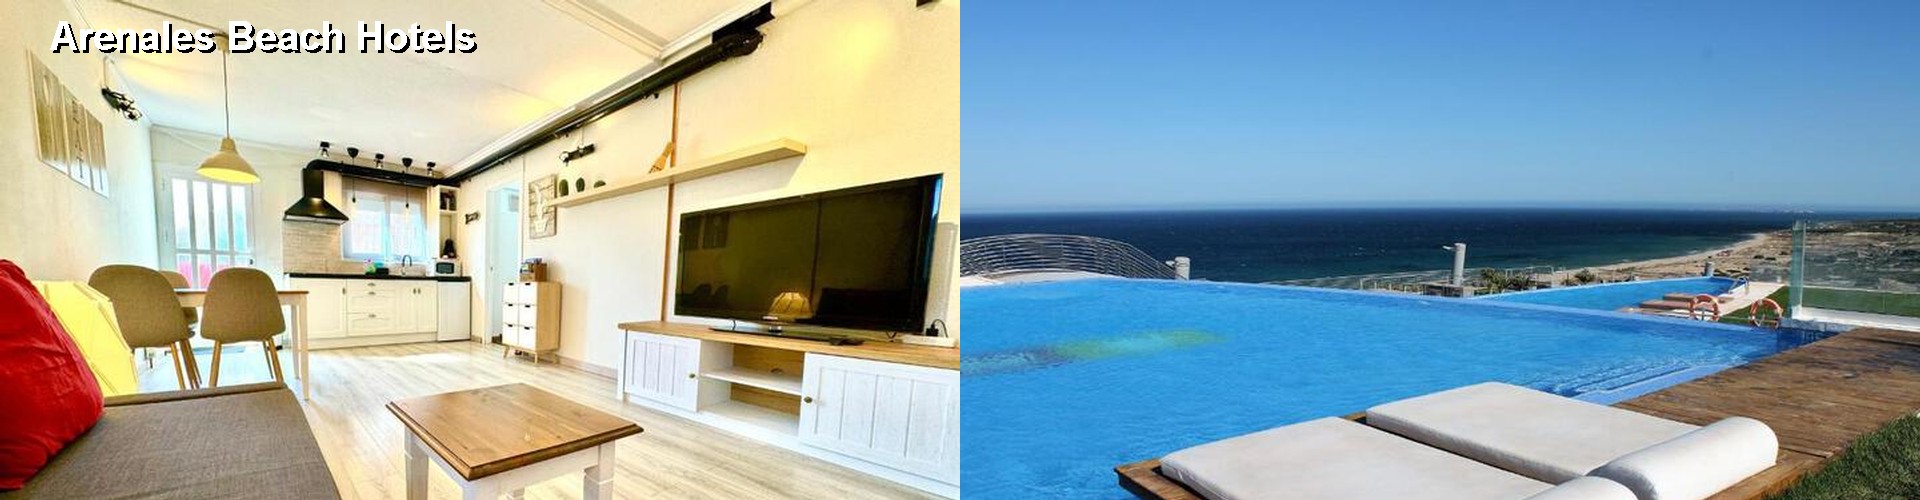 5 Best Hotels near Arenales Beach